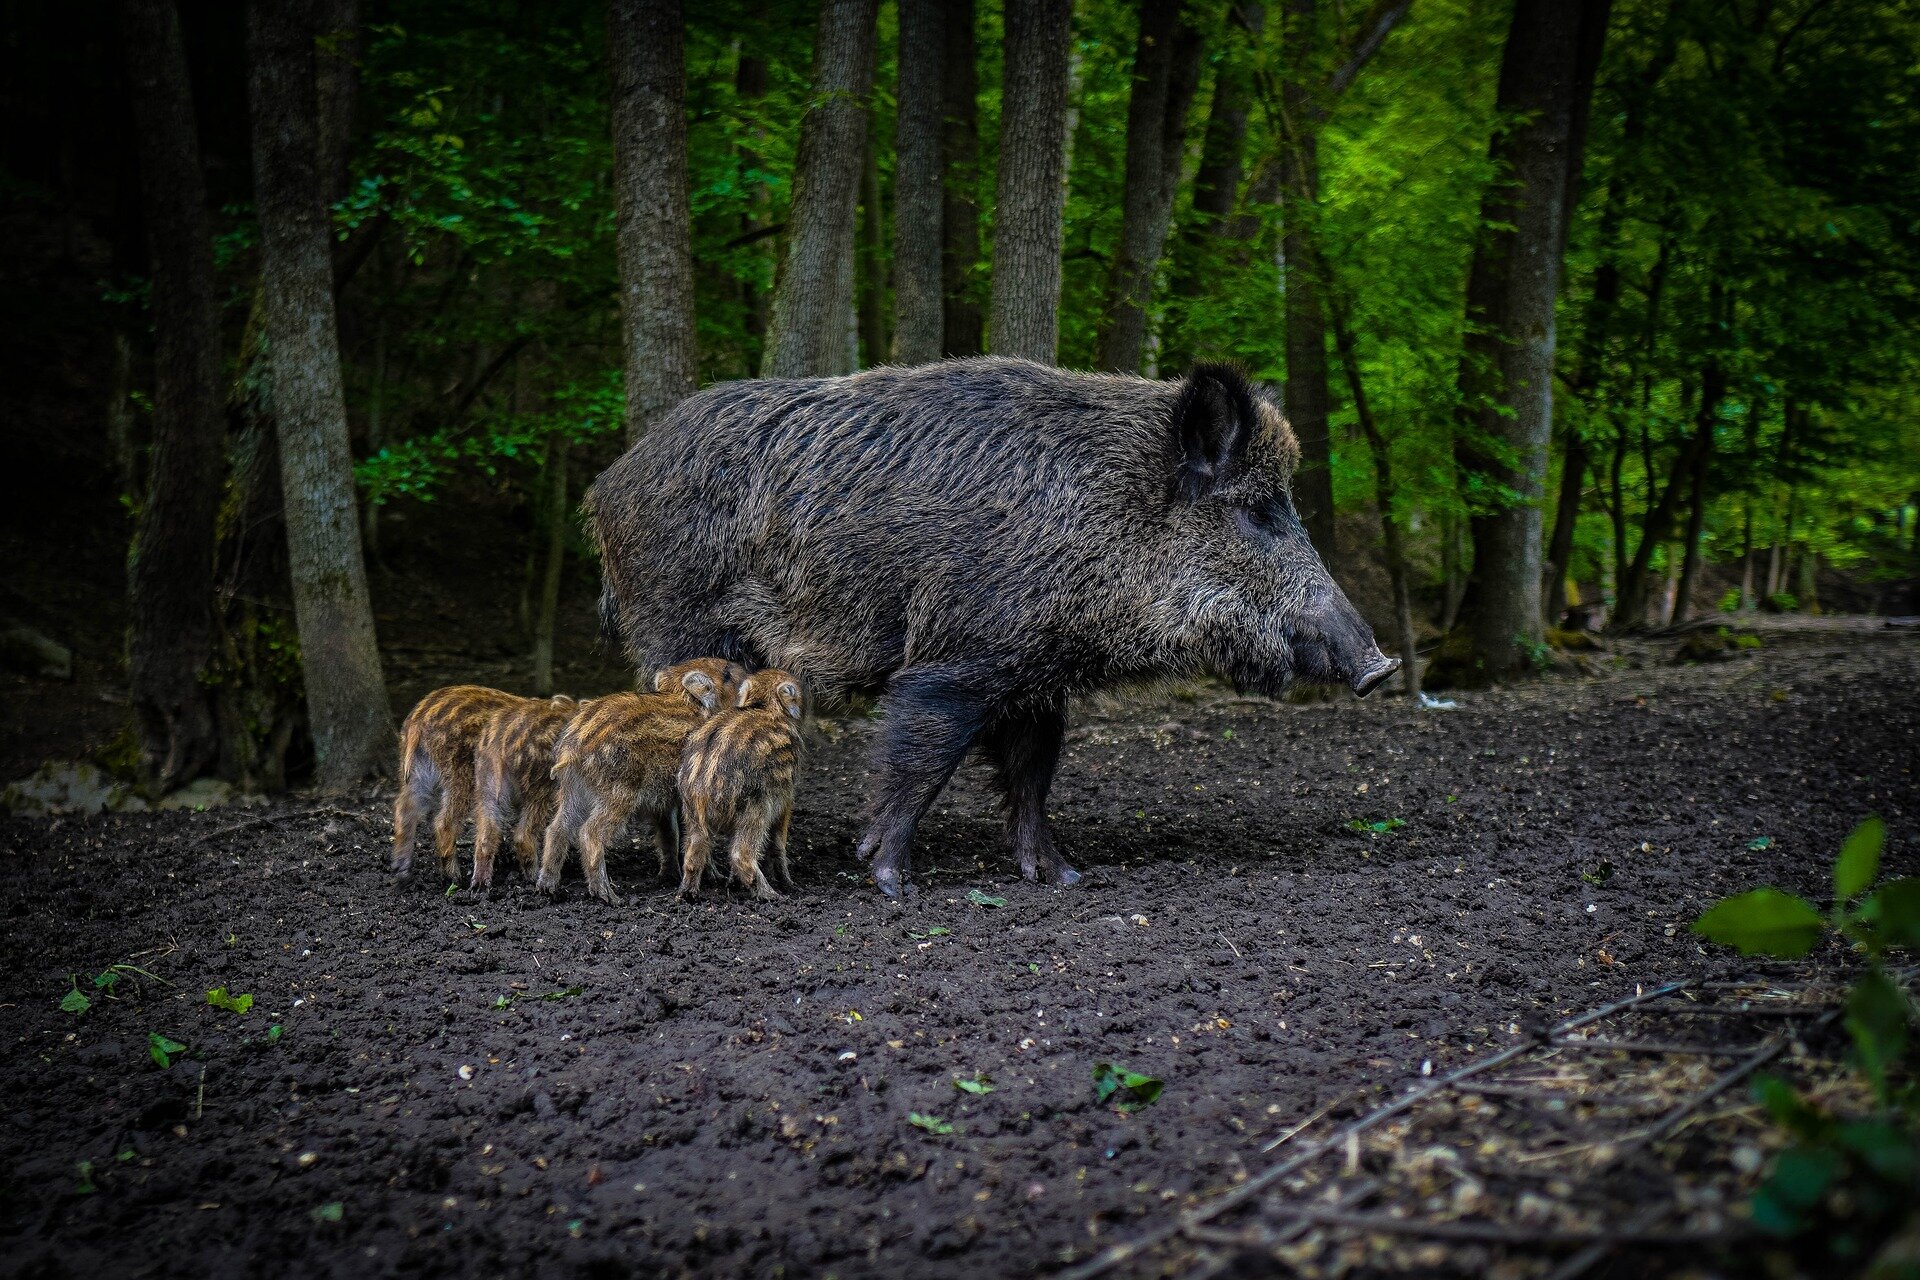 Wild boar in a Hungarian forest may be key to protecting Europe’s pig herds